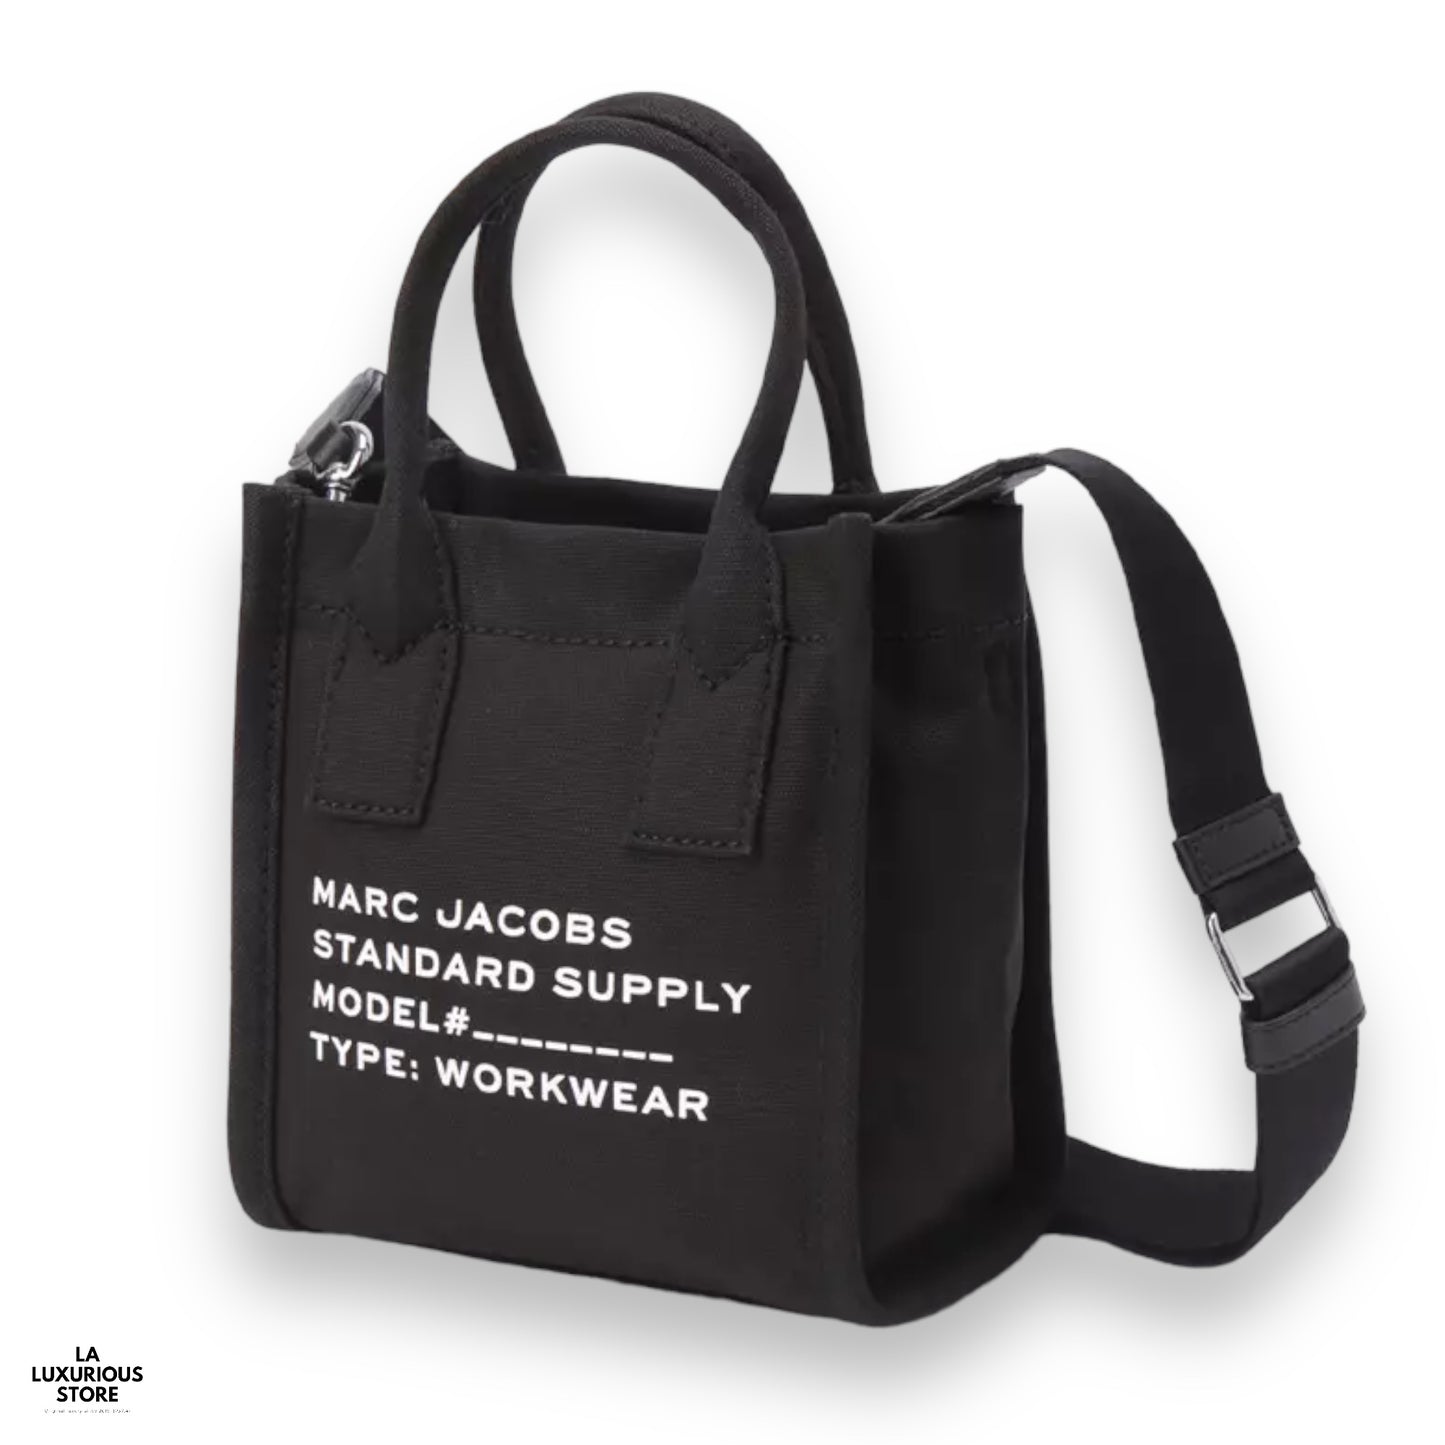 Marc Jacobs Workwear Small Black